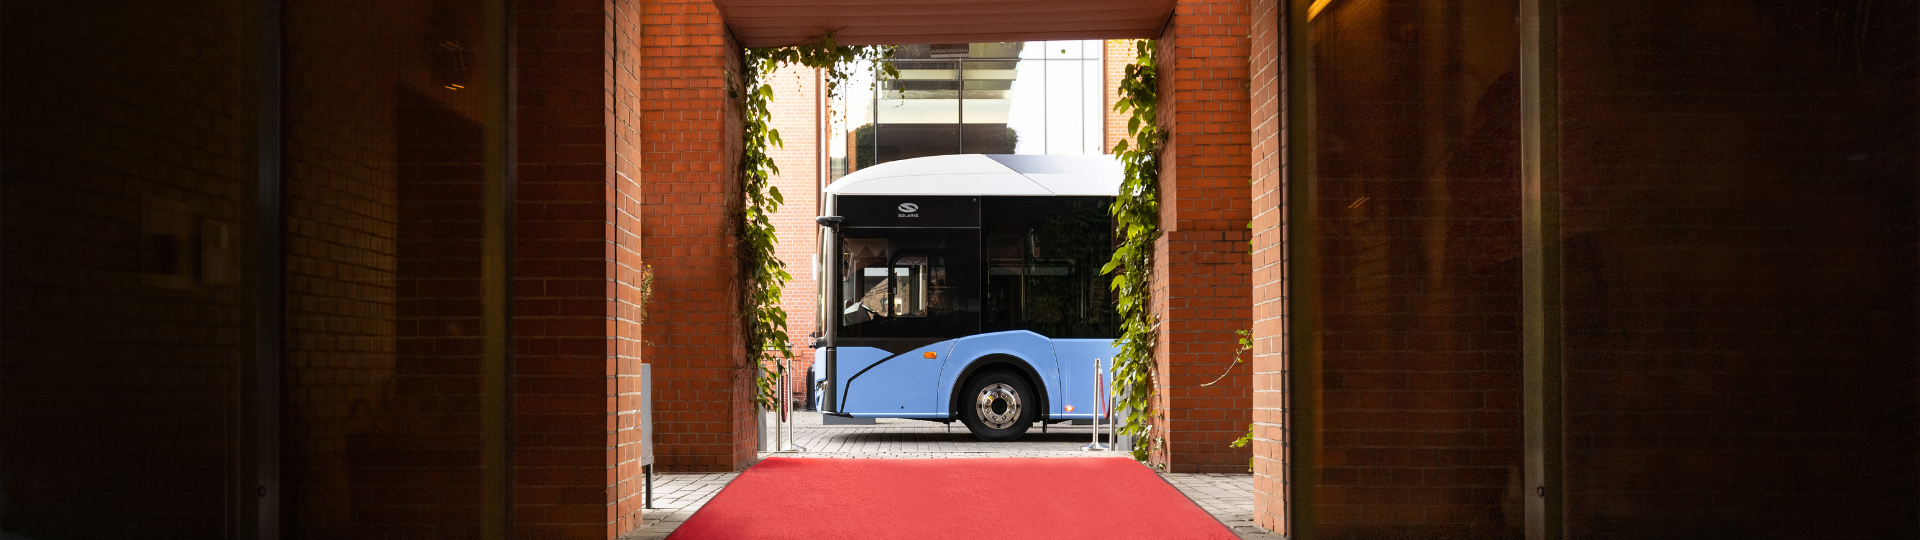 Introducing the Urbino 9 LE electric bus